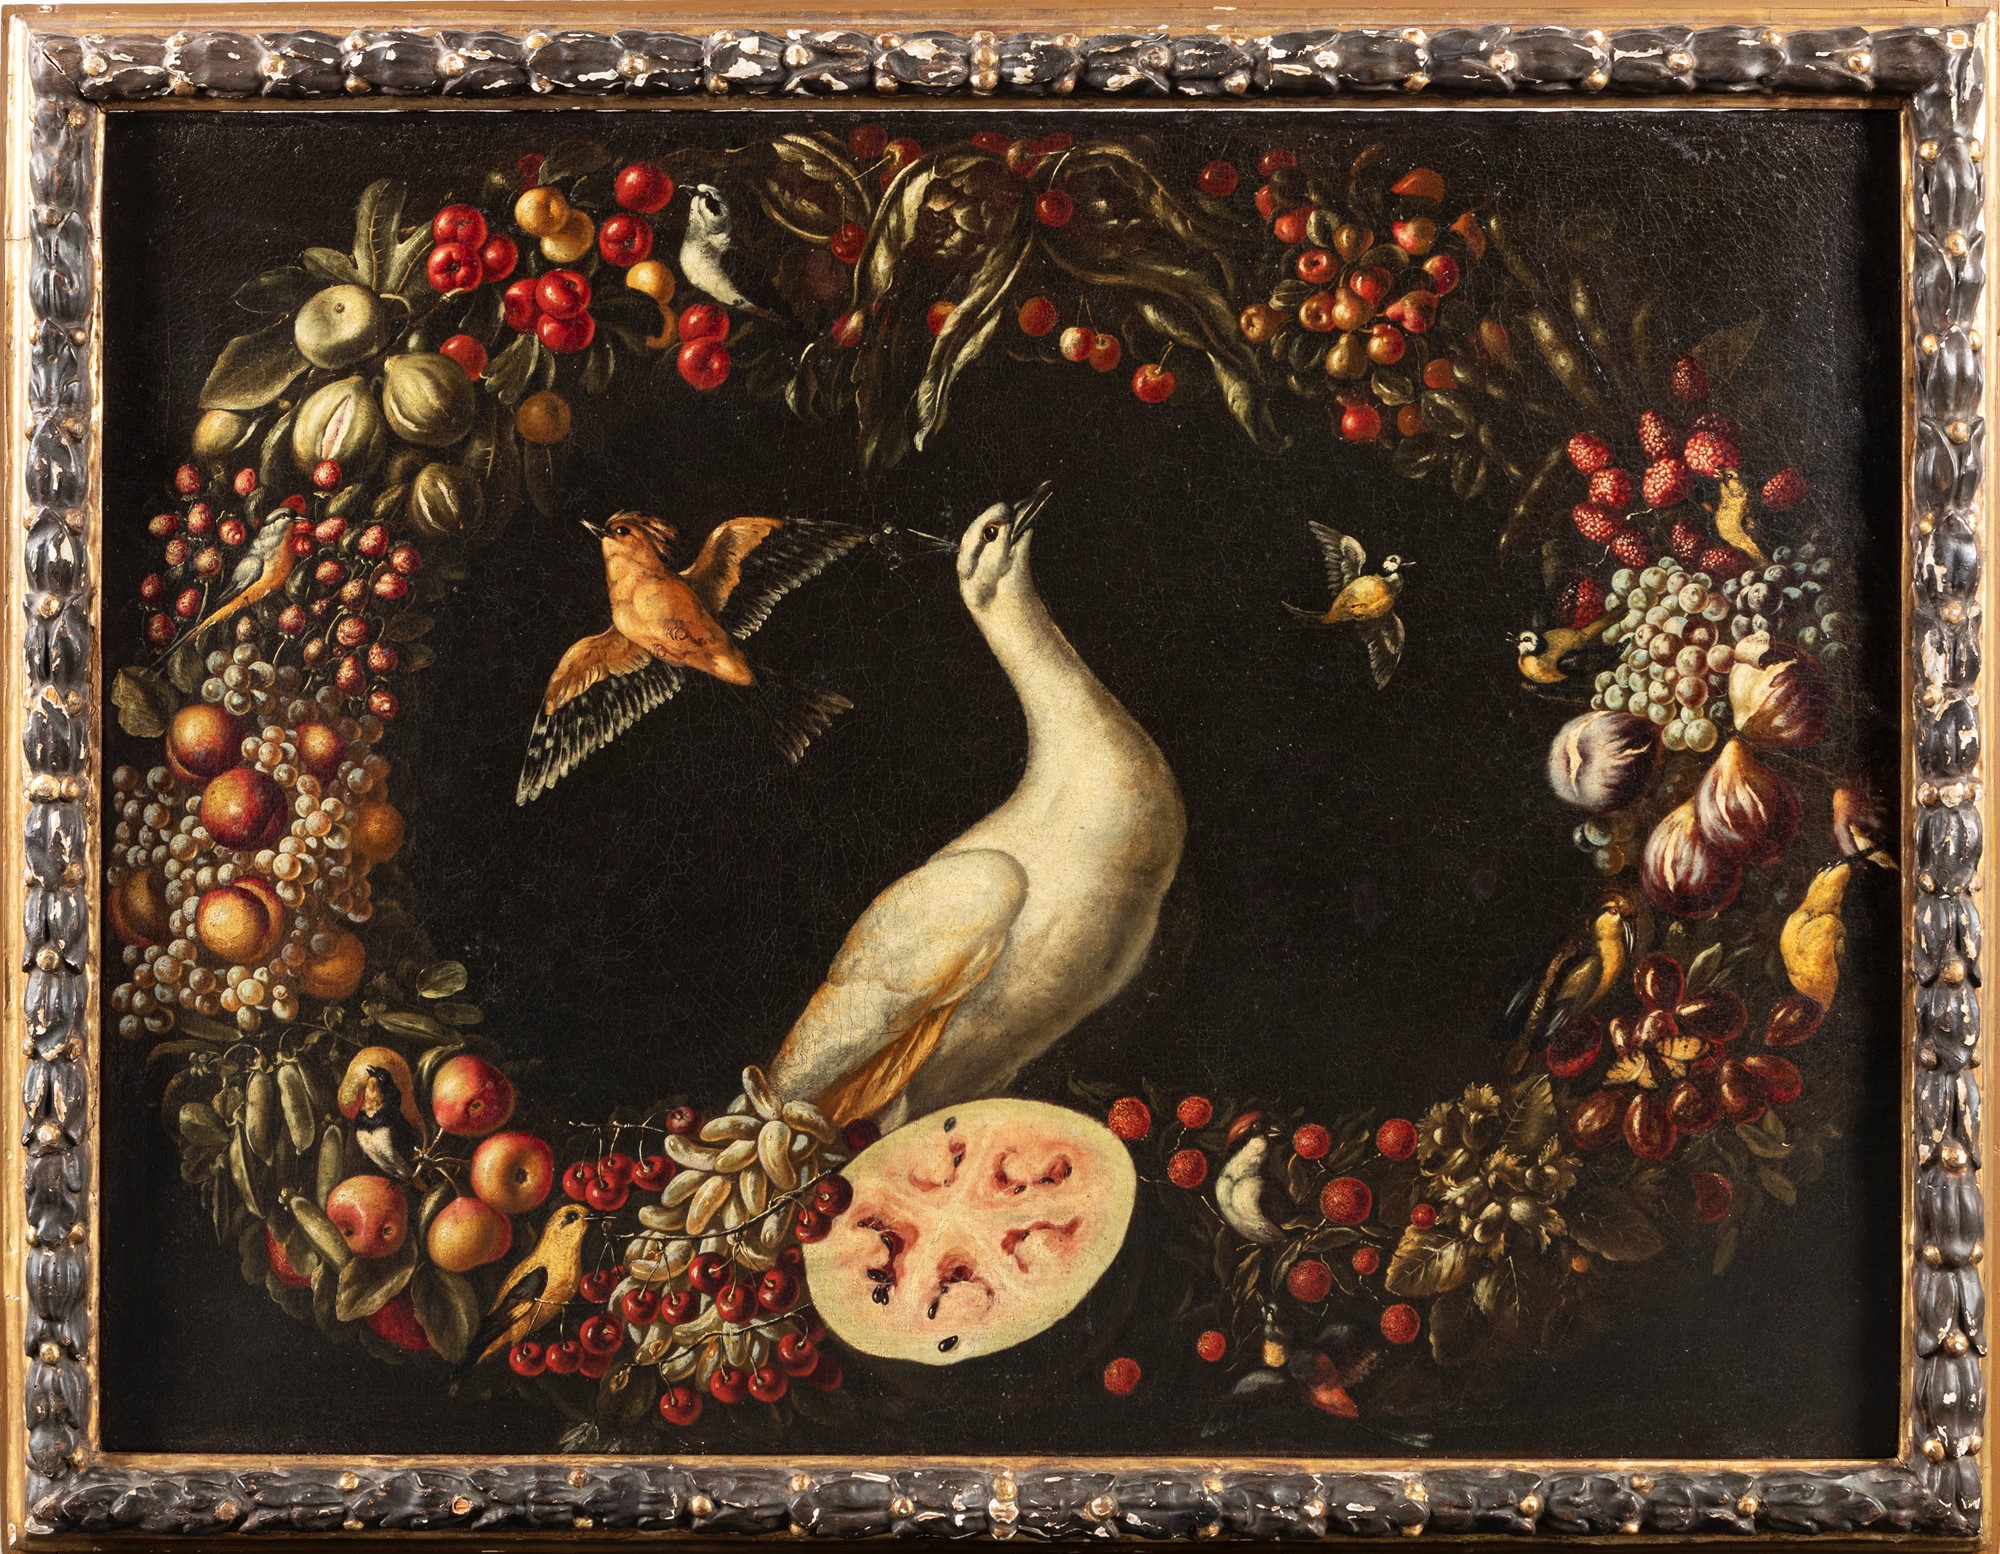 Neapolitan school, XVII century - Garland of fruit and vegetables with white peacock and other birds - Image 2 of 7